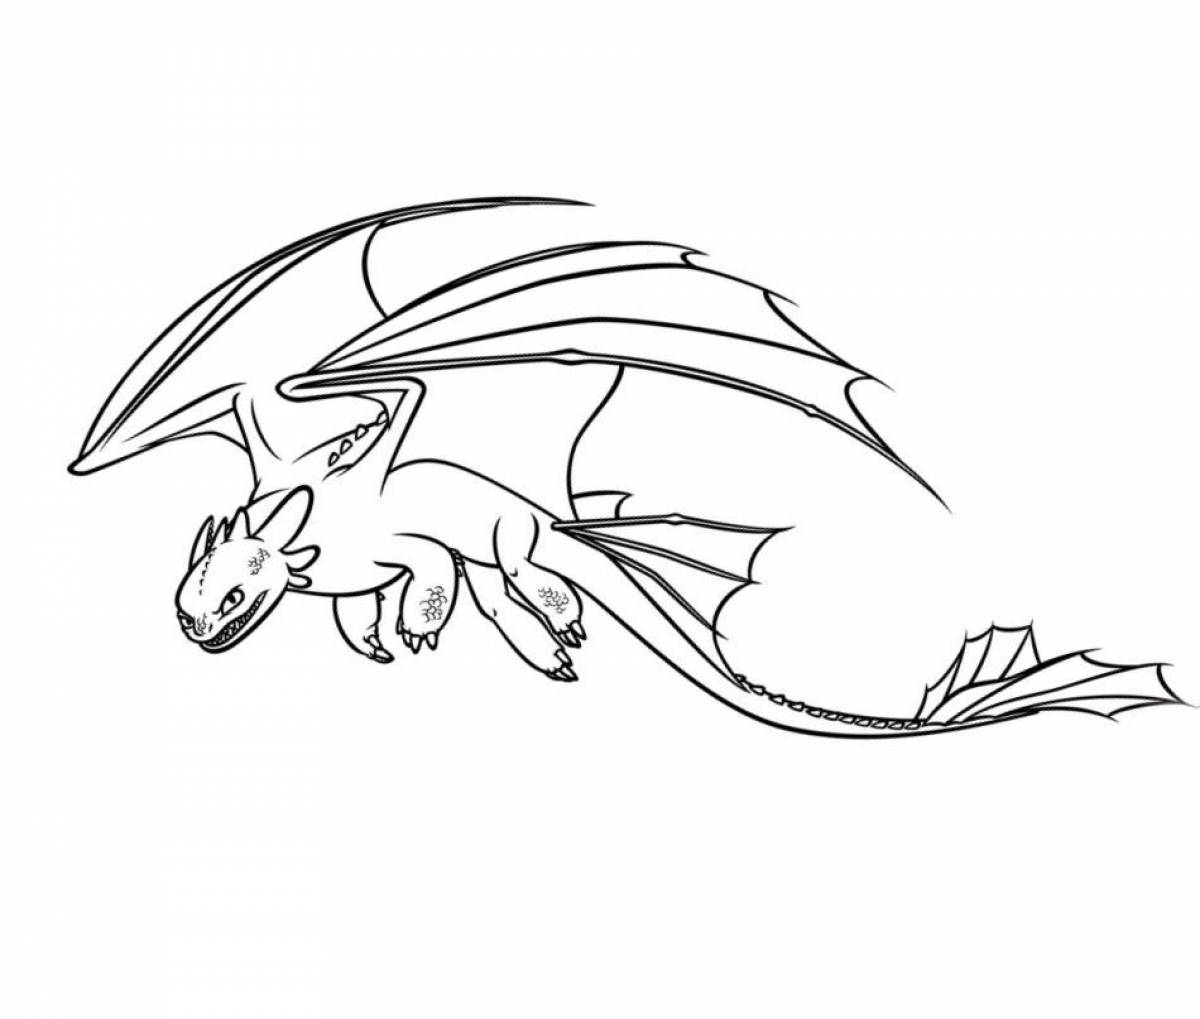 Toothless coloring book